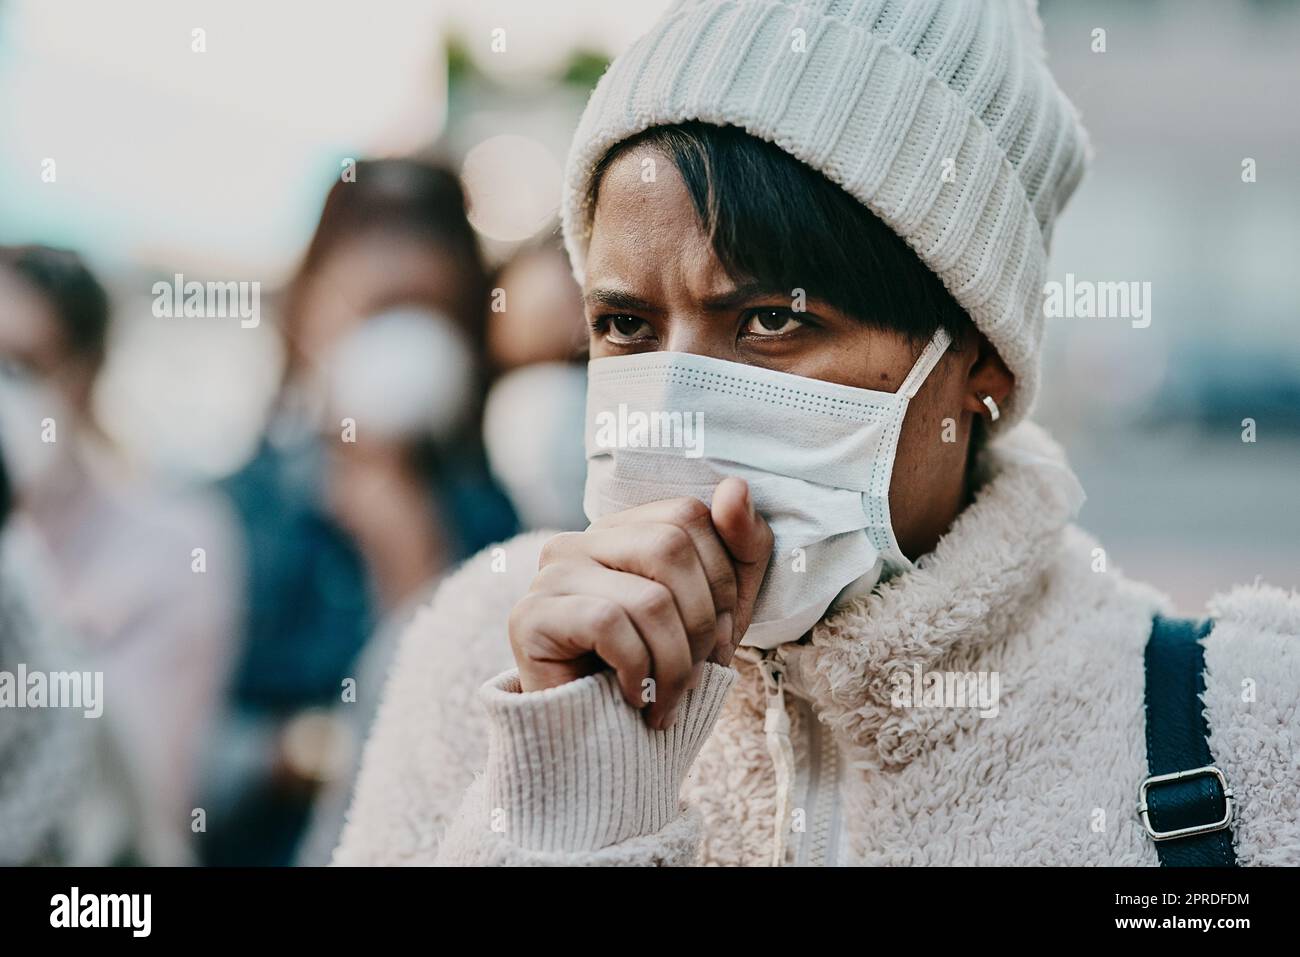 Covid, sick and wearing a mask in public to be infection free. Health, wellness and tourist safety. Crowd, virus and flu protection for international or local travel and outdoors commute. Stock Photo